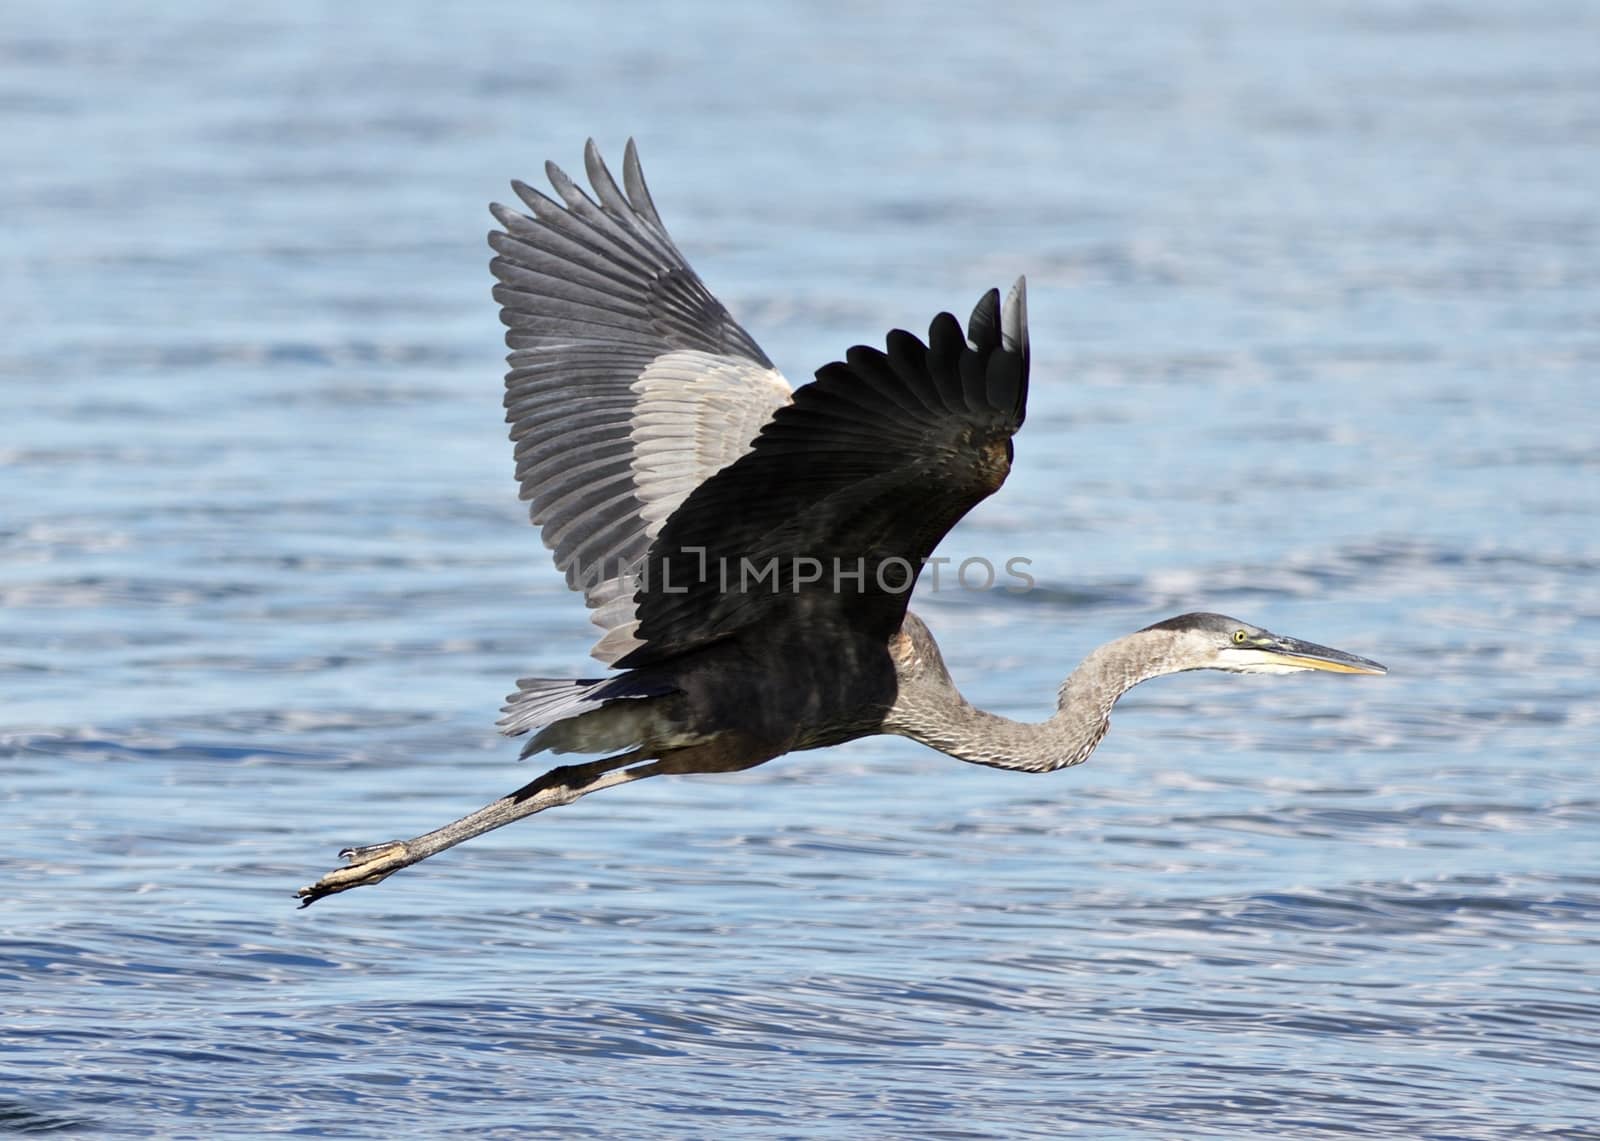 Photo of a great heron in flight near the water